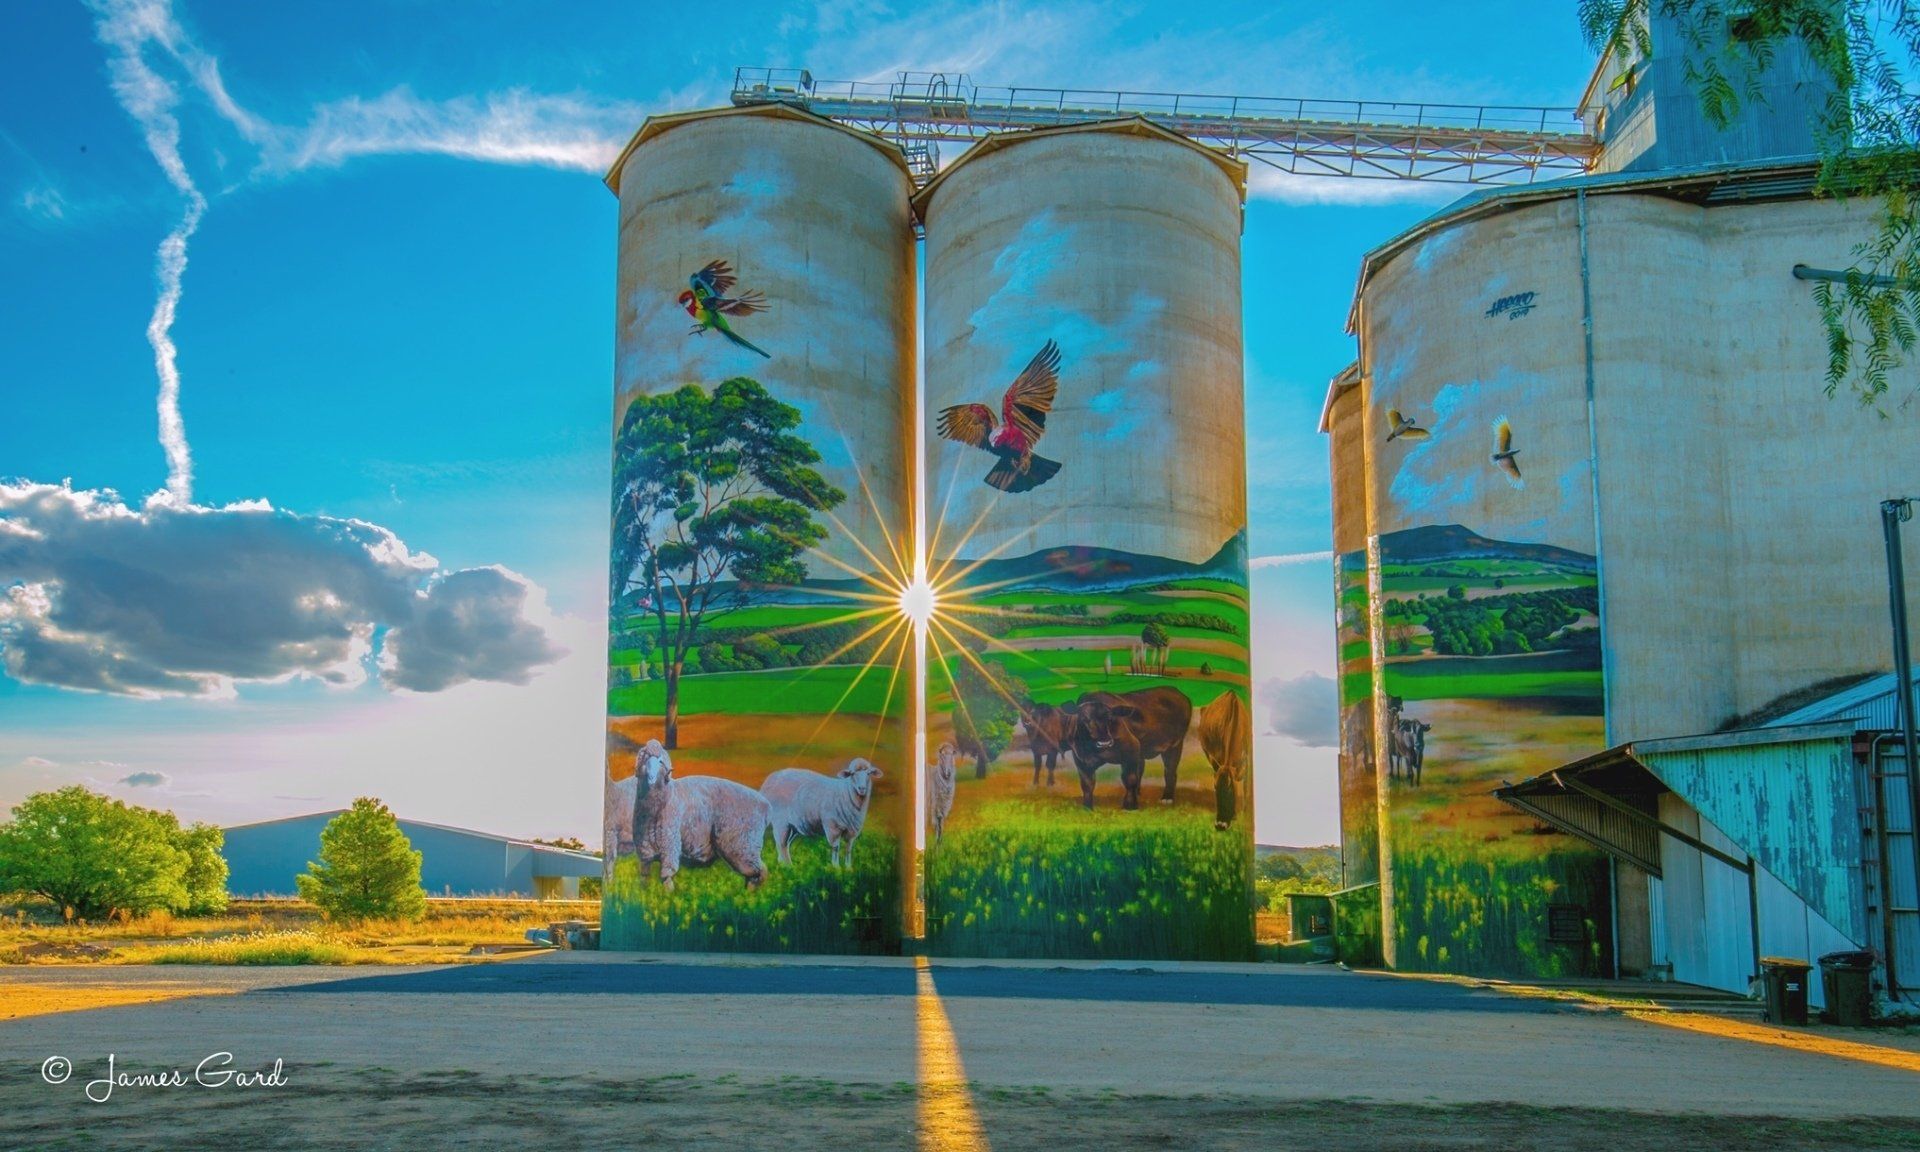 Grenfell Silos in New South Wales by Heesco Khosnaran. Photo by James Gard